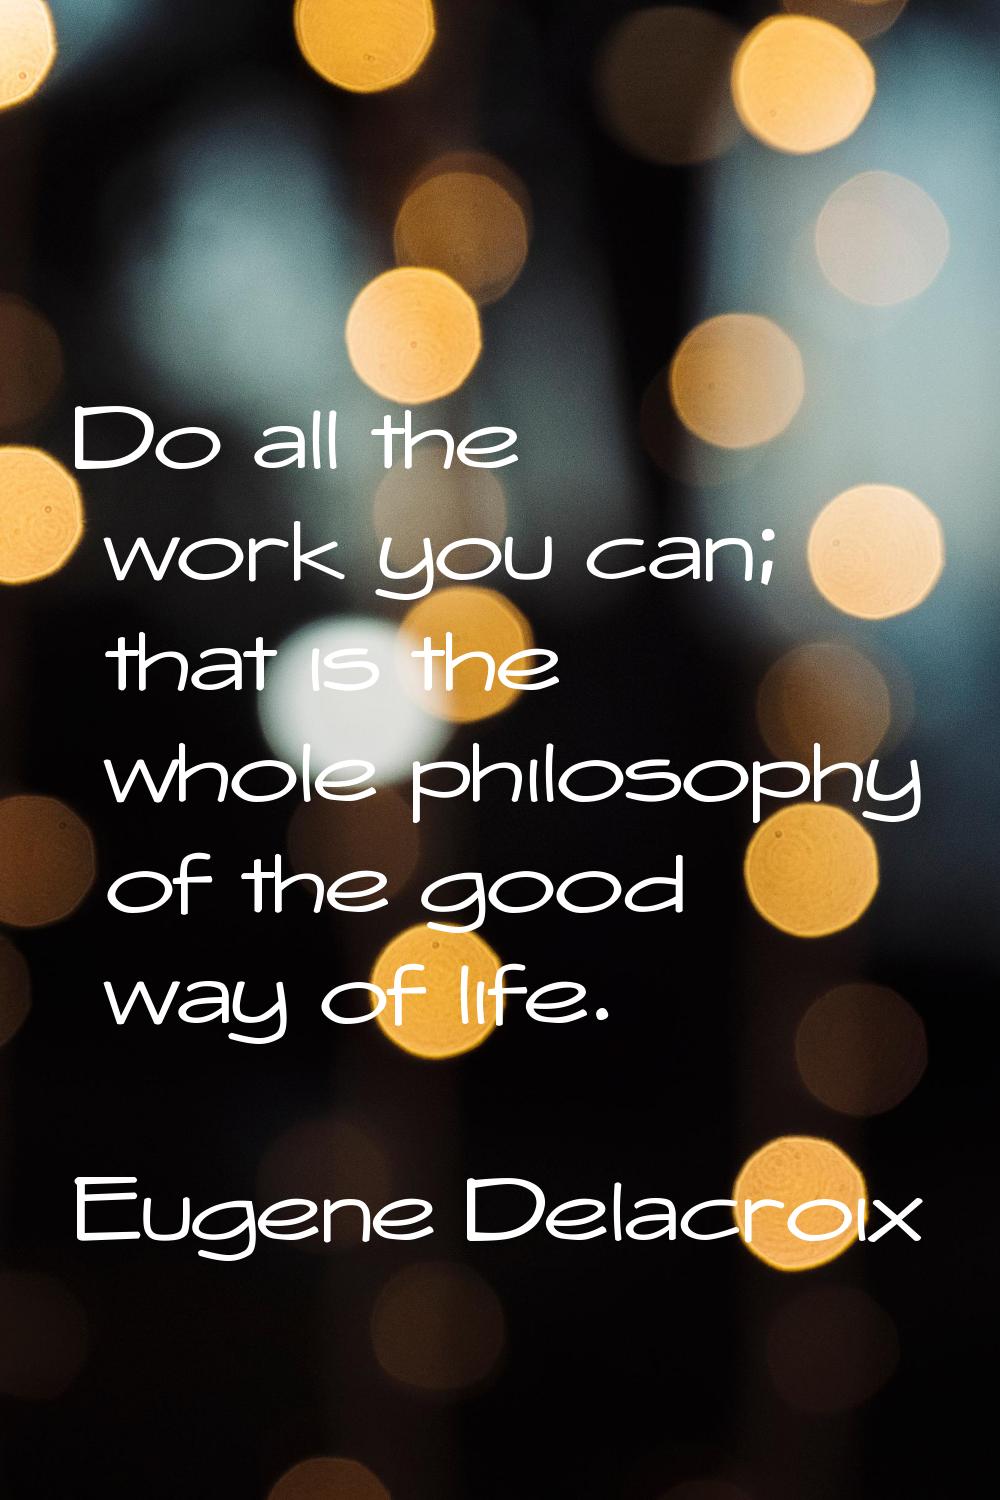 Do all the work you can; that is the whole philosophy of the good way of life.